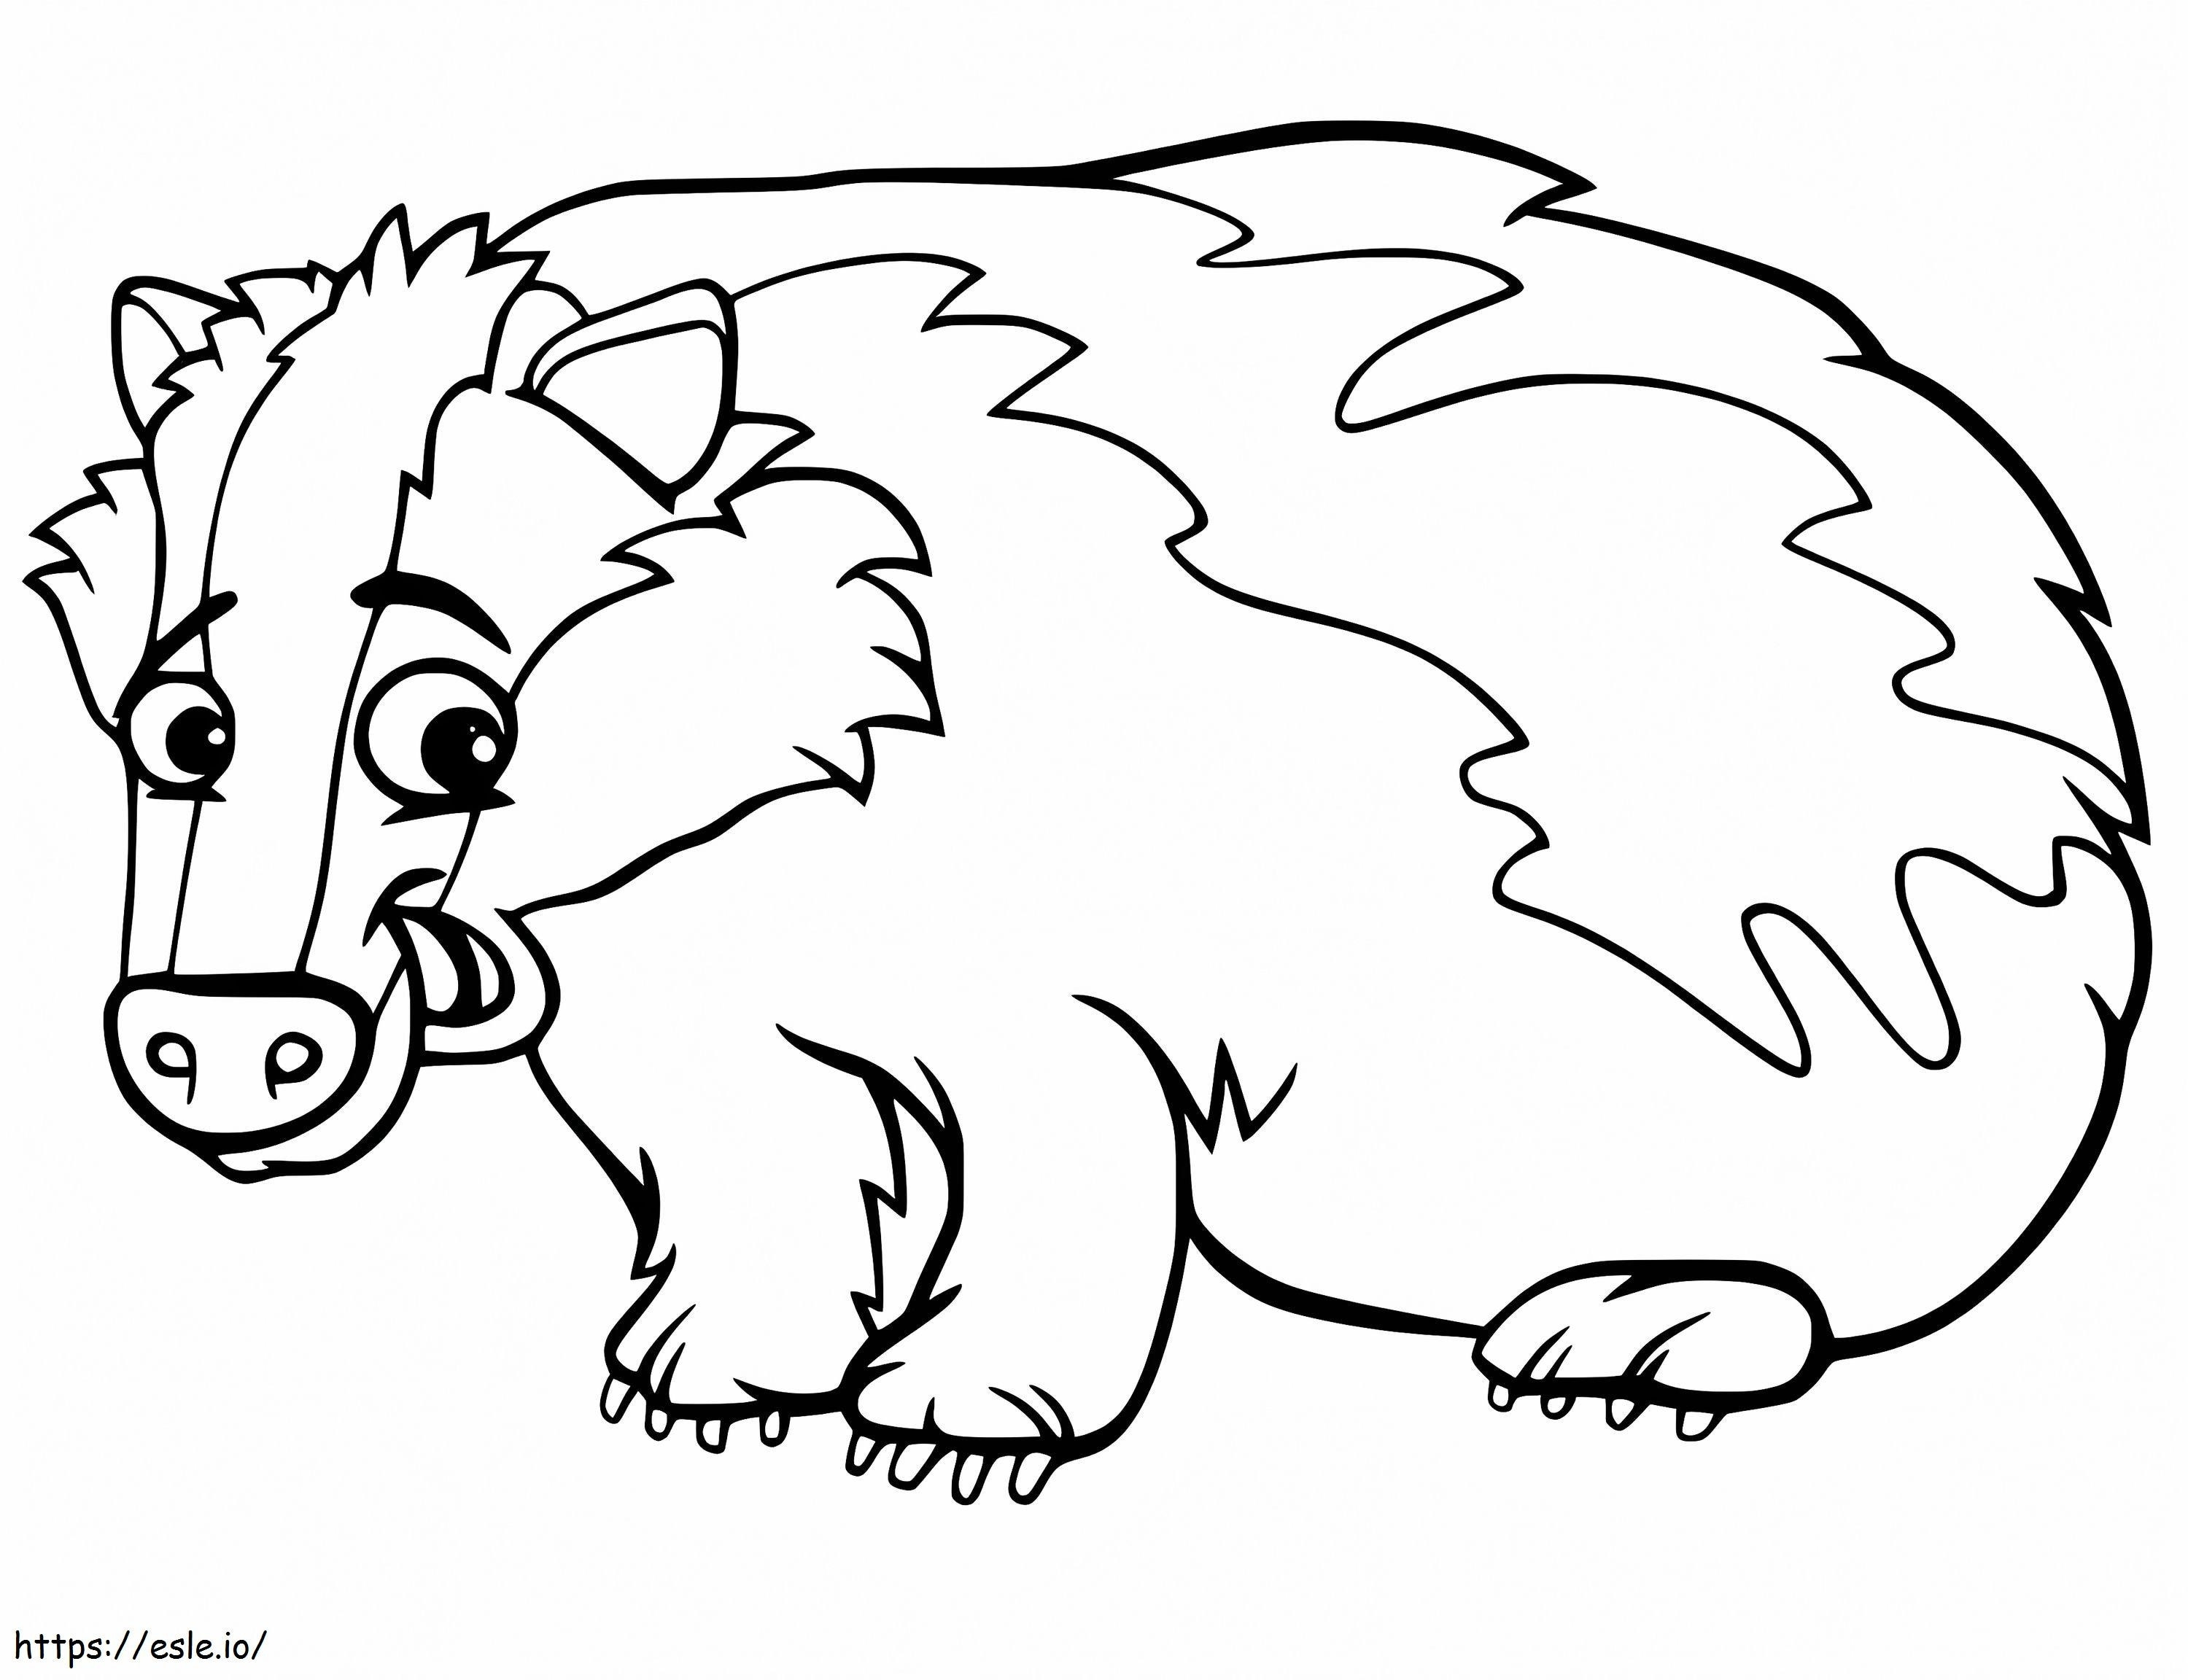 Badger Smiles coloring page